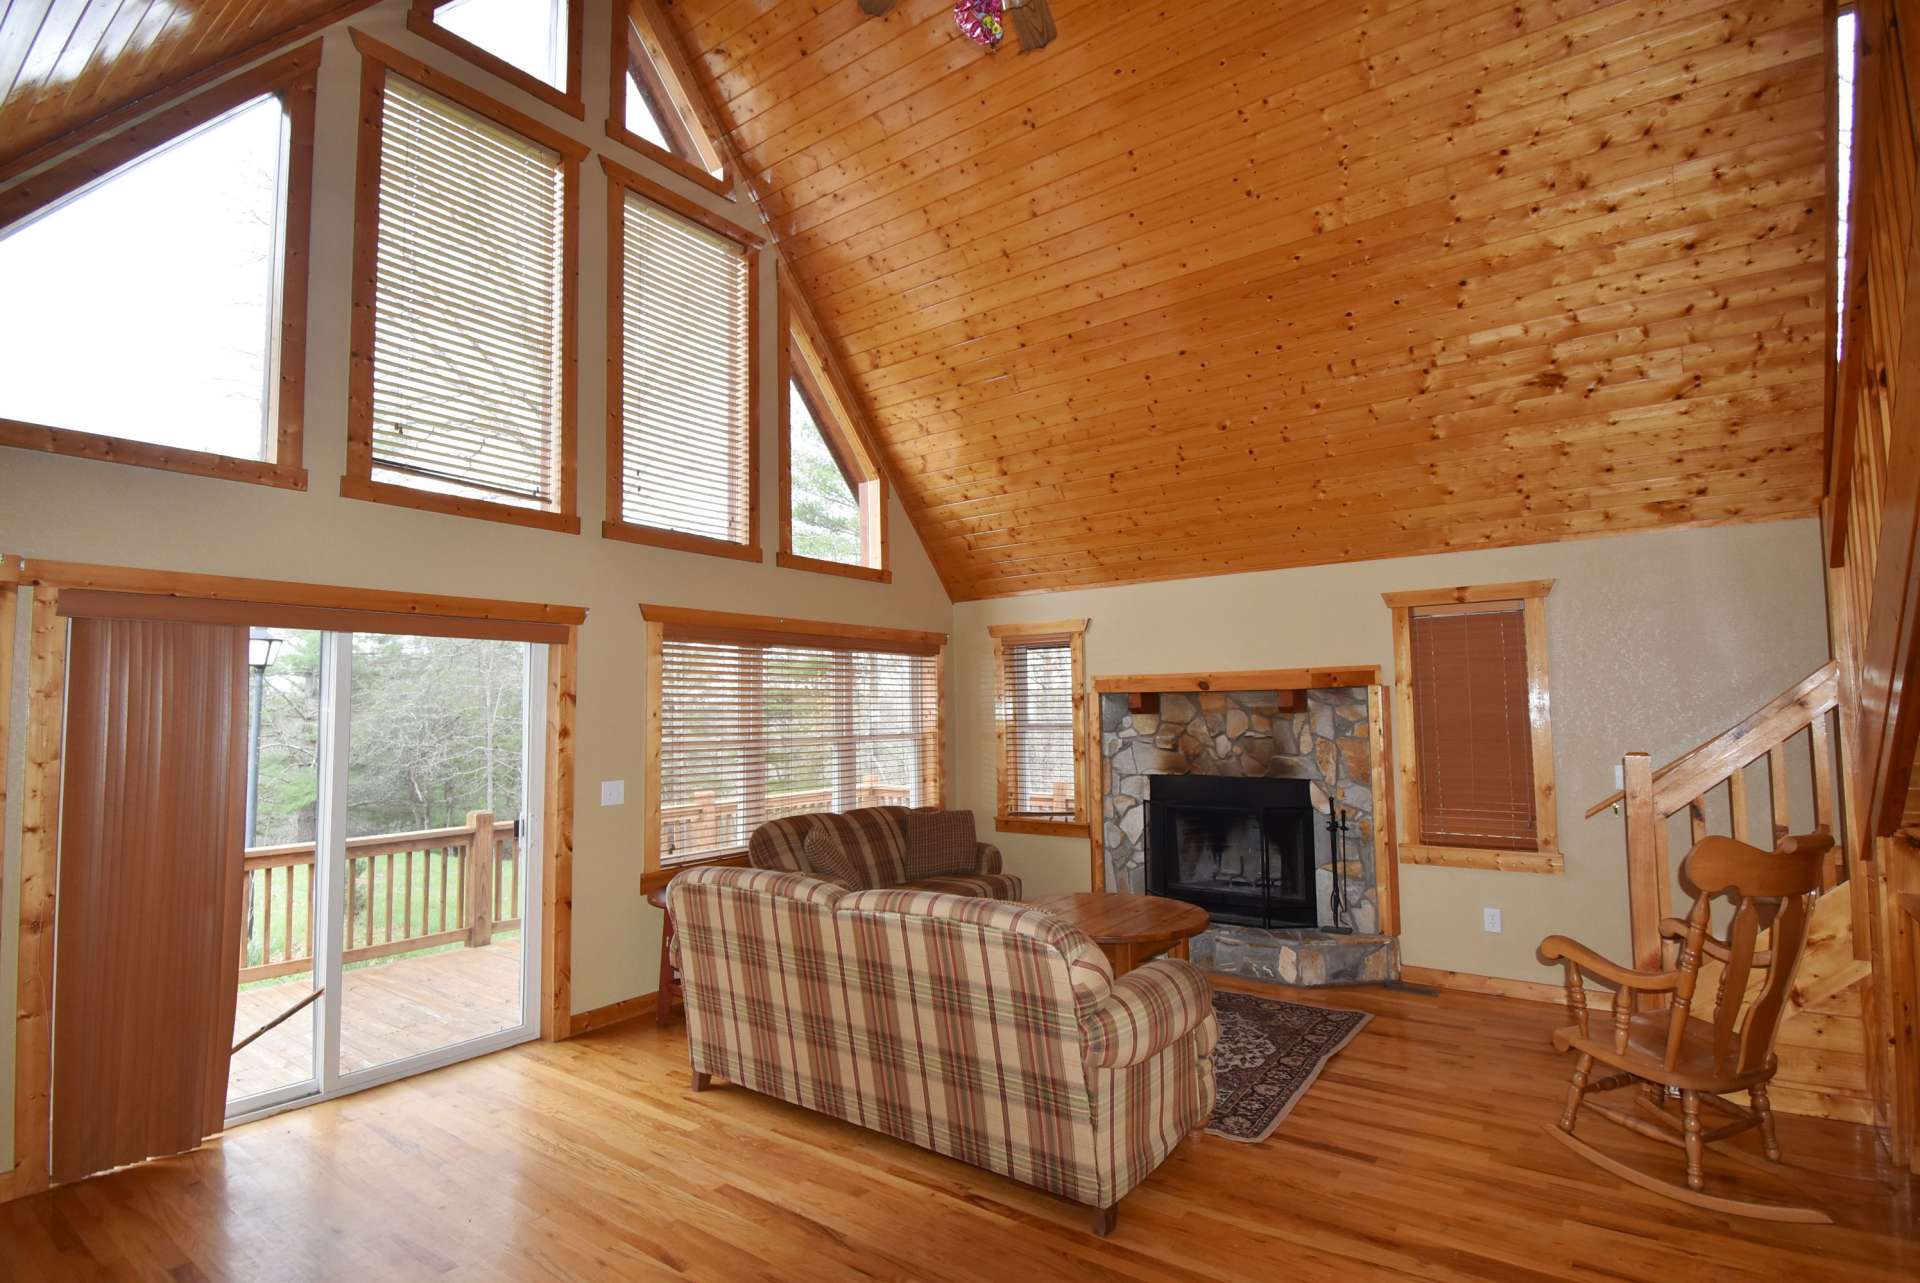 The open floor plan offers a large vaulted great room with a wall of windows filling the cabin with natural light.